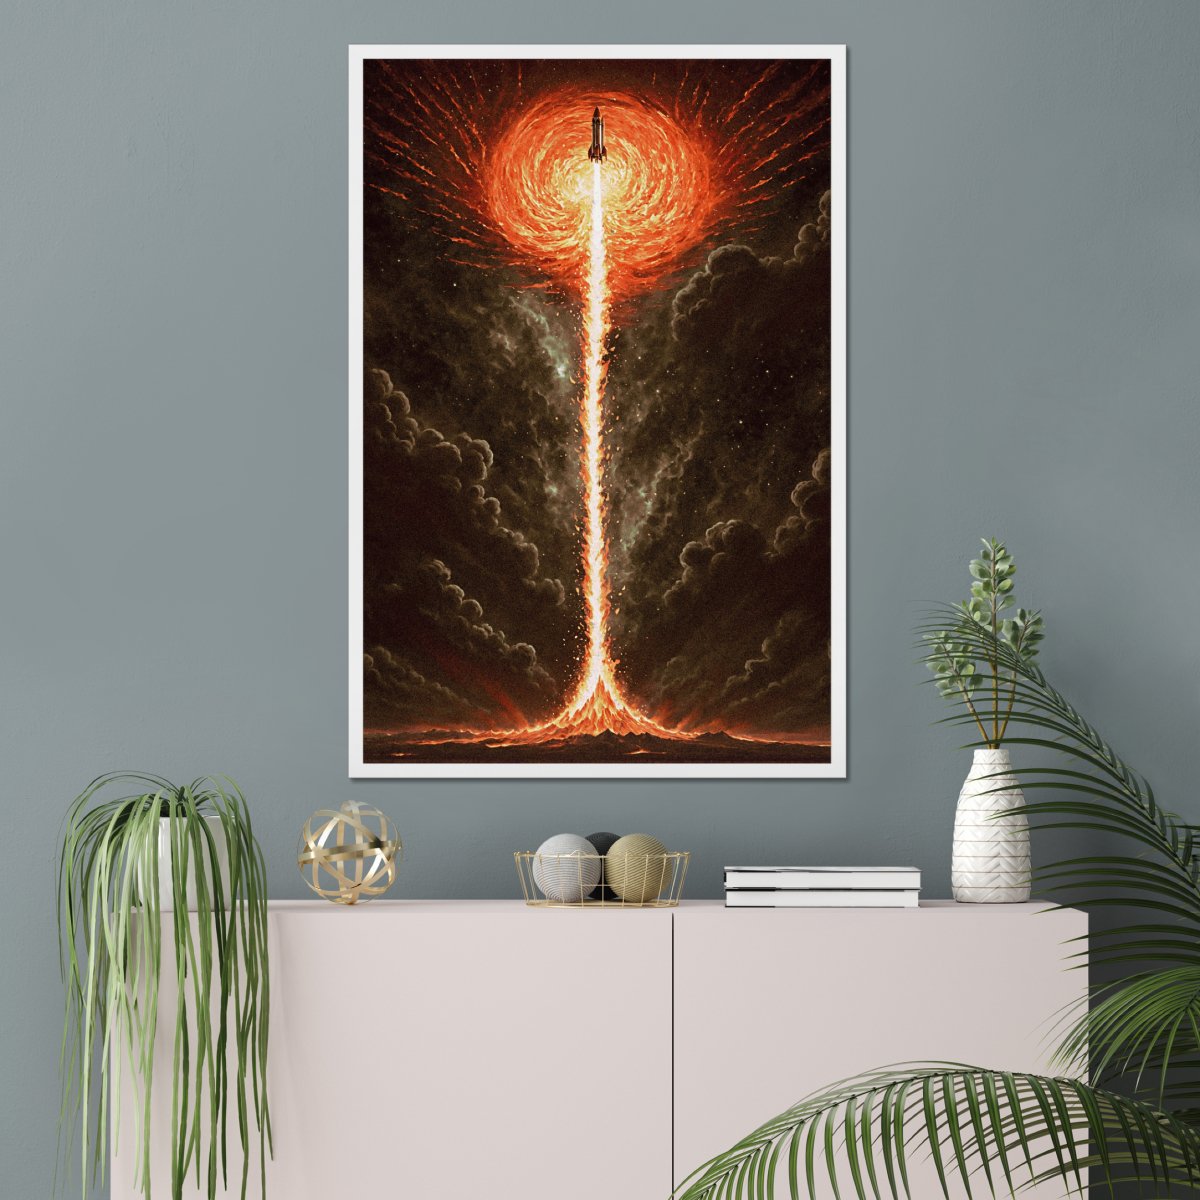 Leaving the abyss - Art print - Poster - Ever colorful